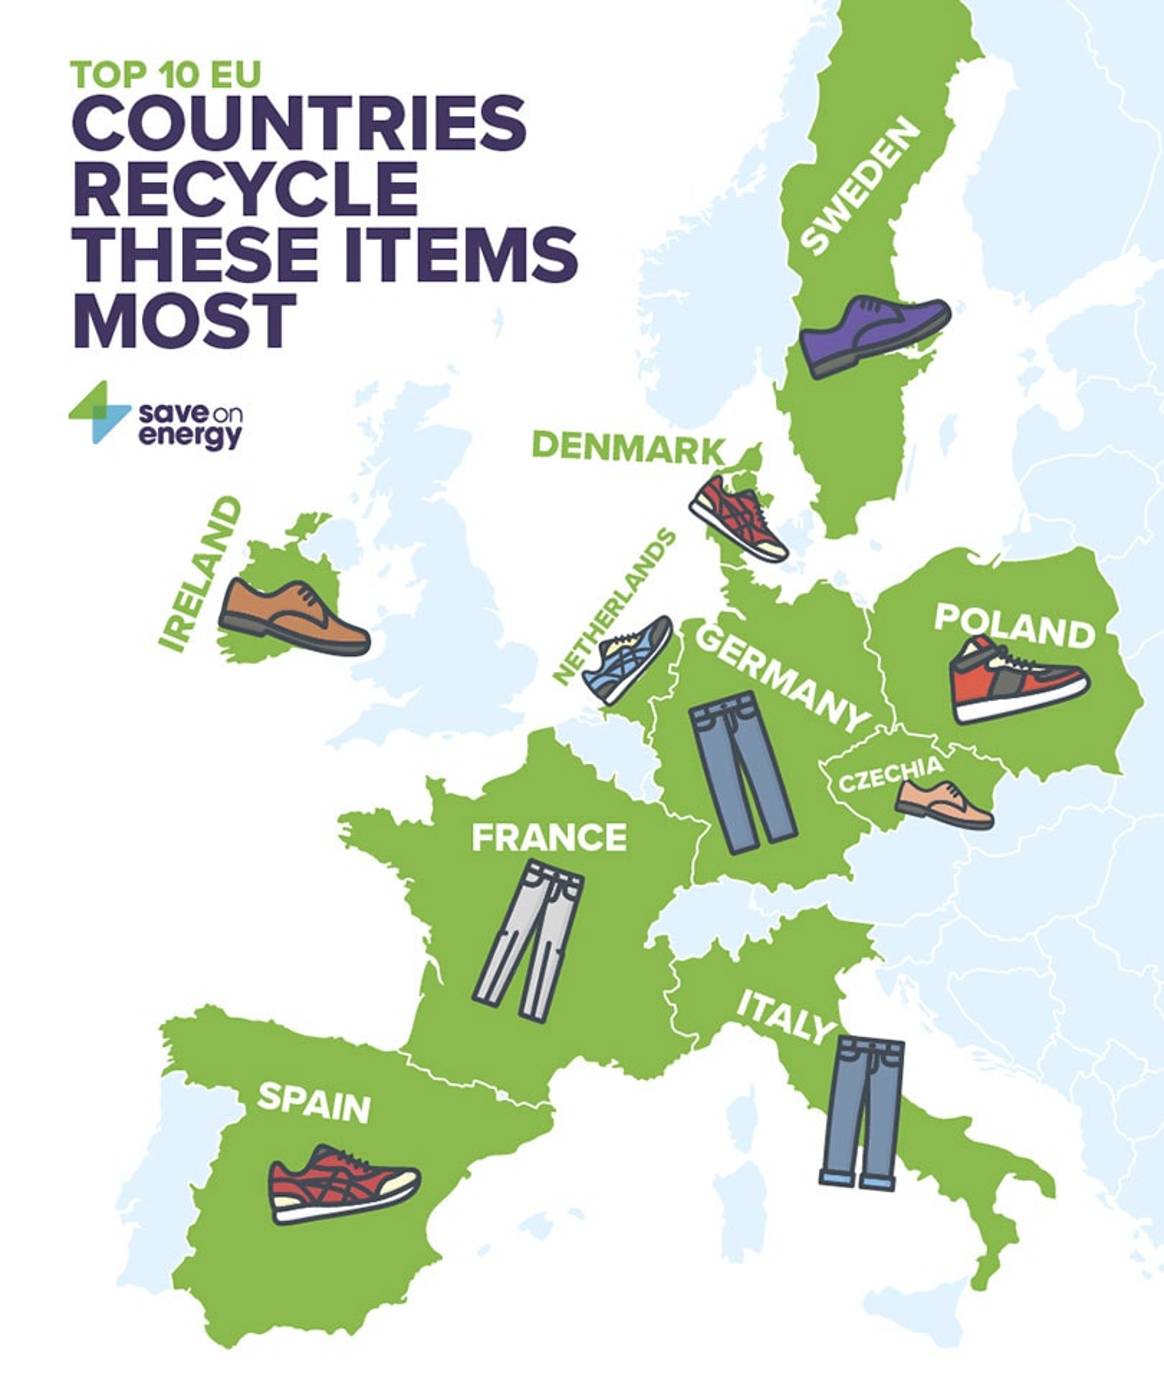 Ireland named most likely EU country to recycle clothes